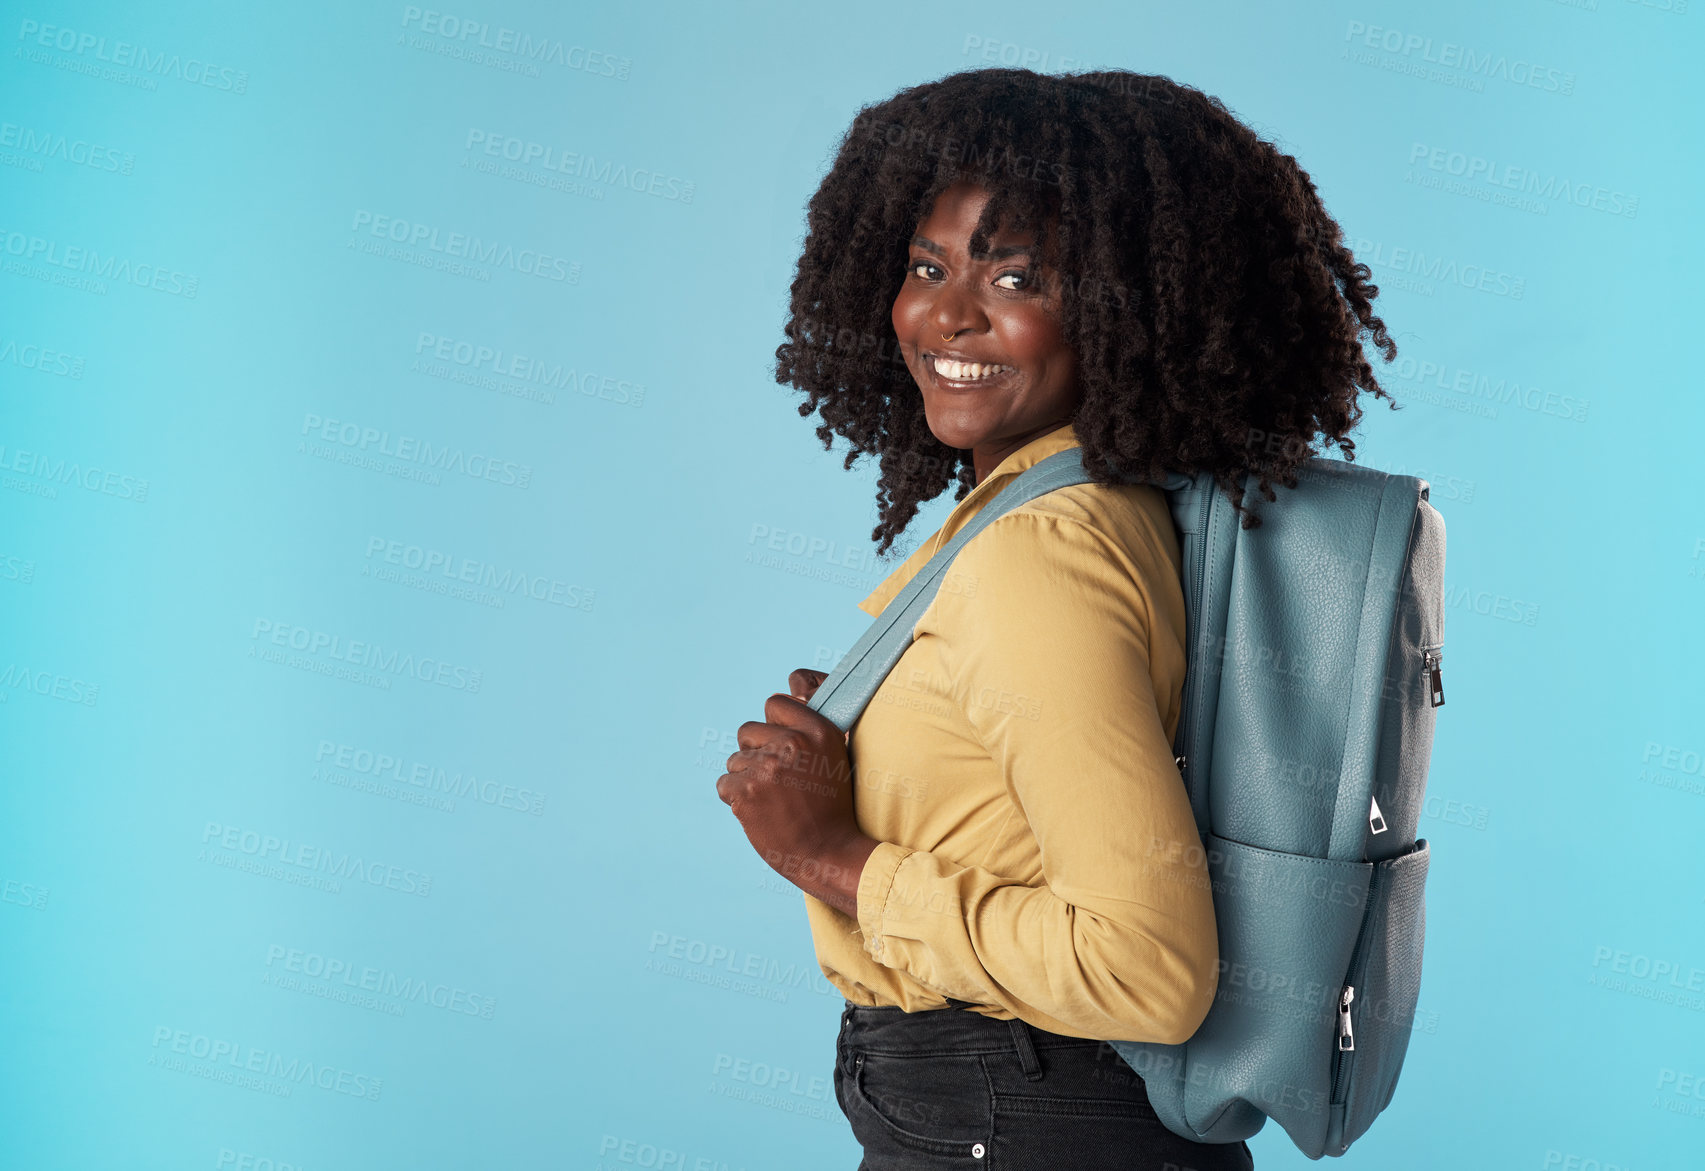 Buy stock photo Studio shot of an attractive young woman carrying a backpack against a blue background